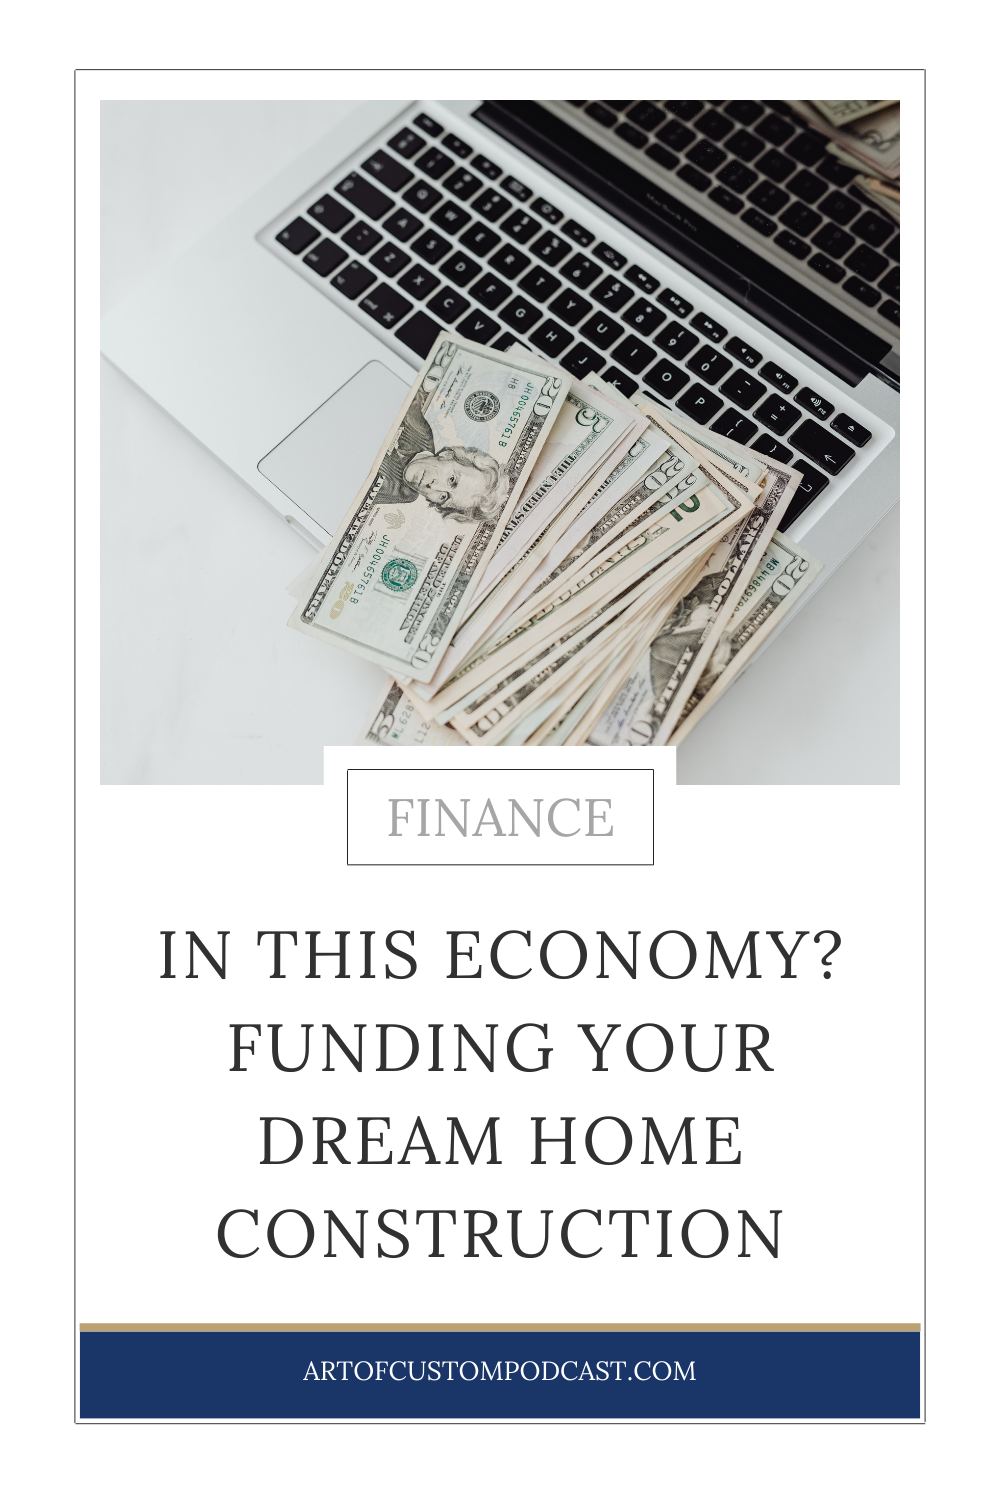 Funding Your New Home Construction Project